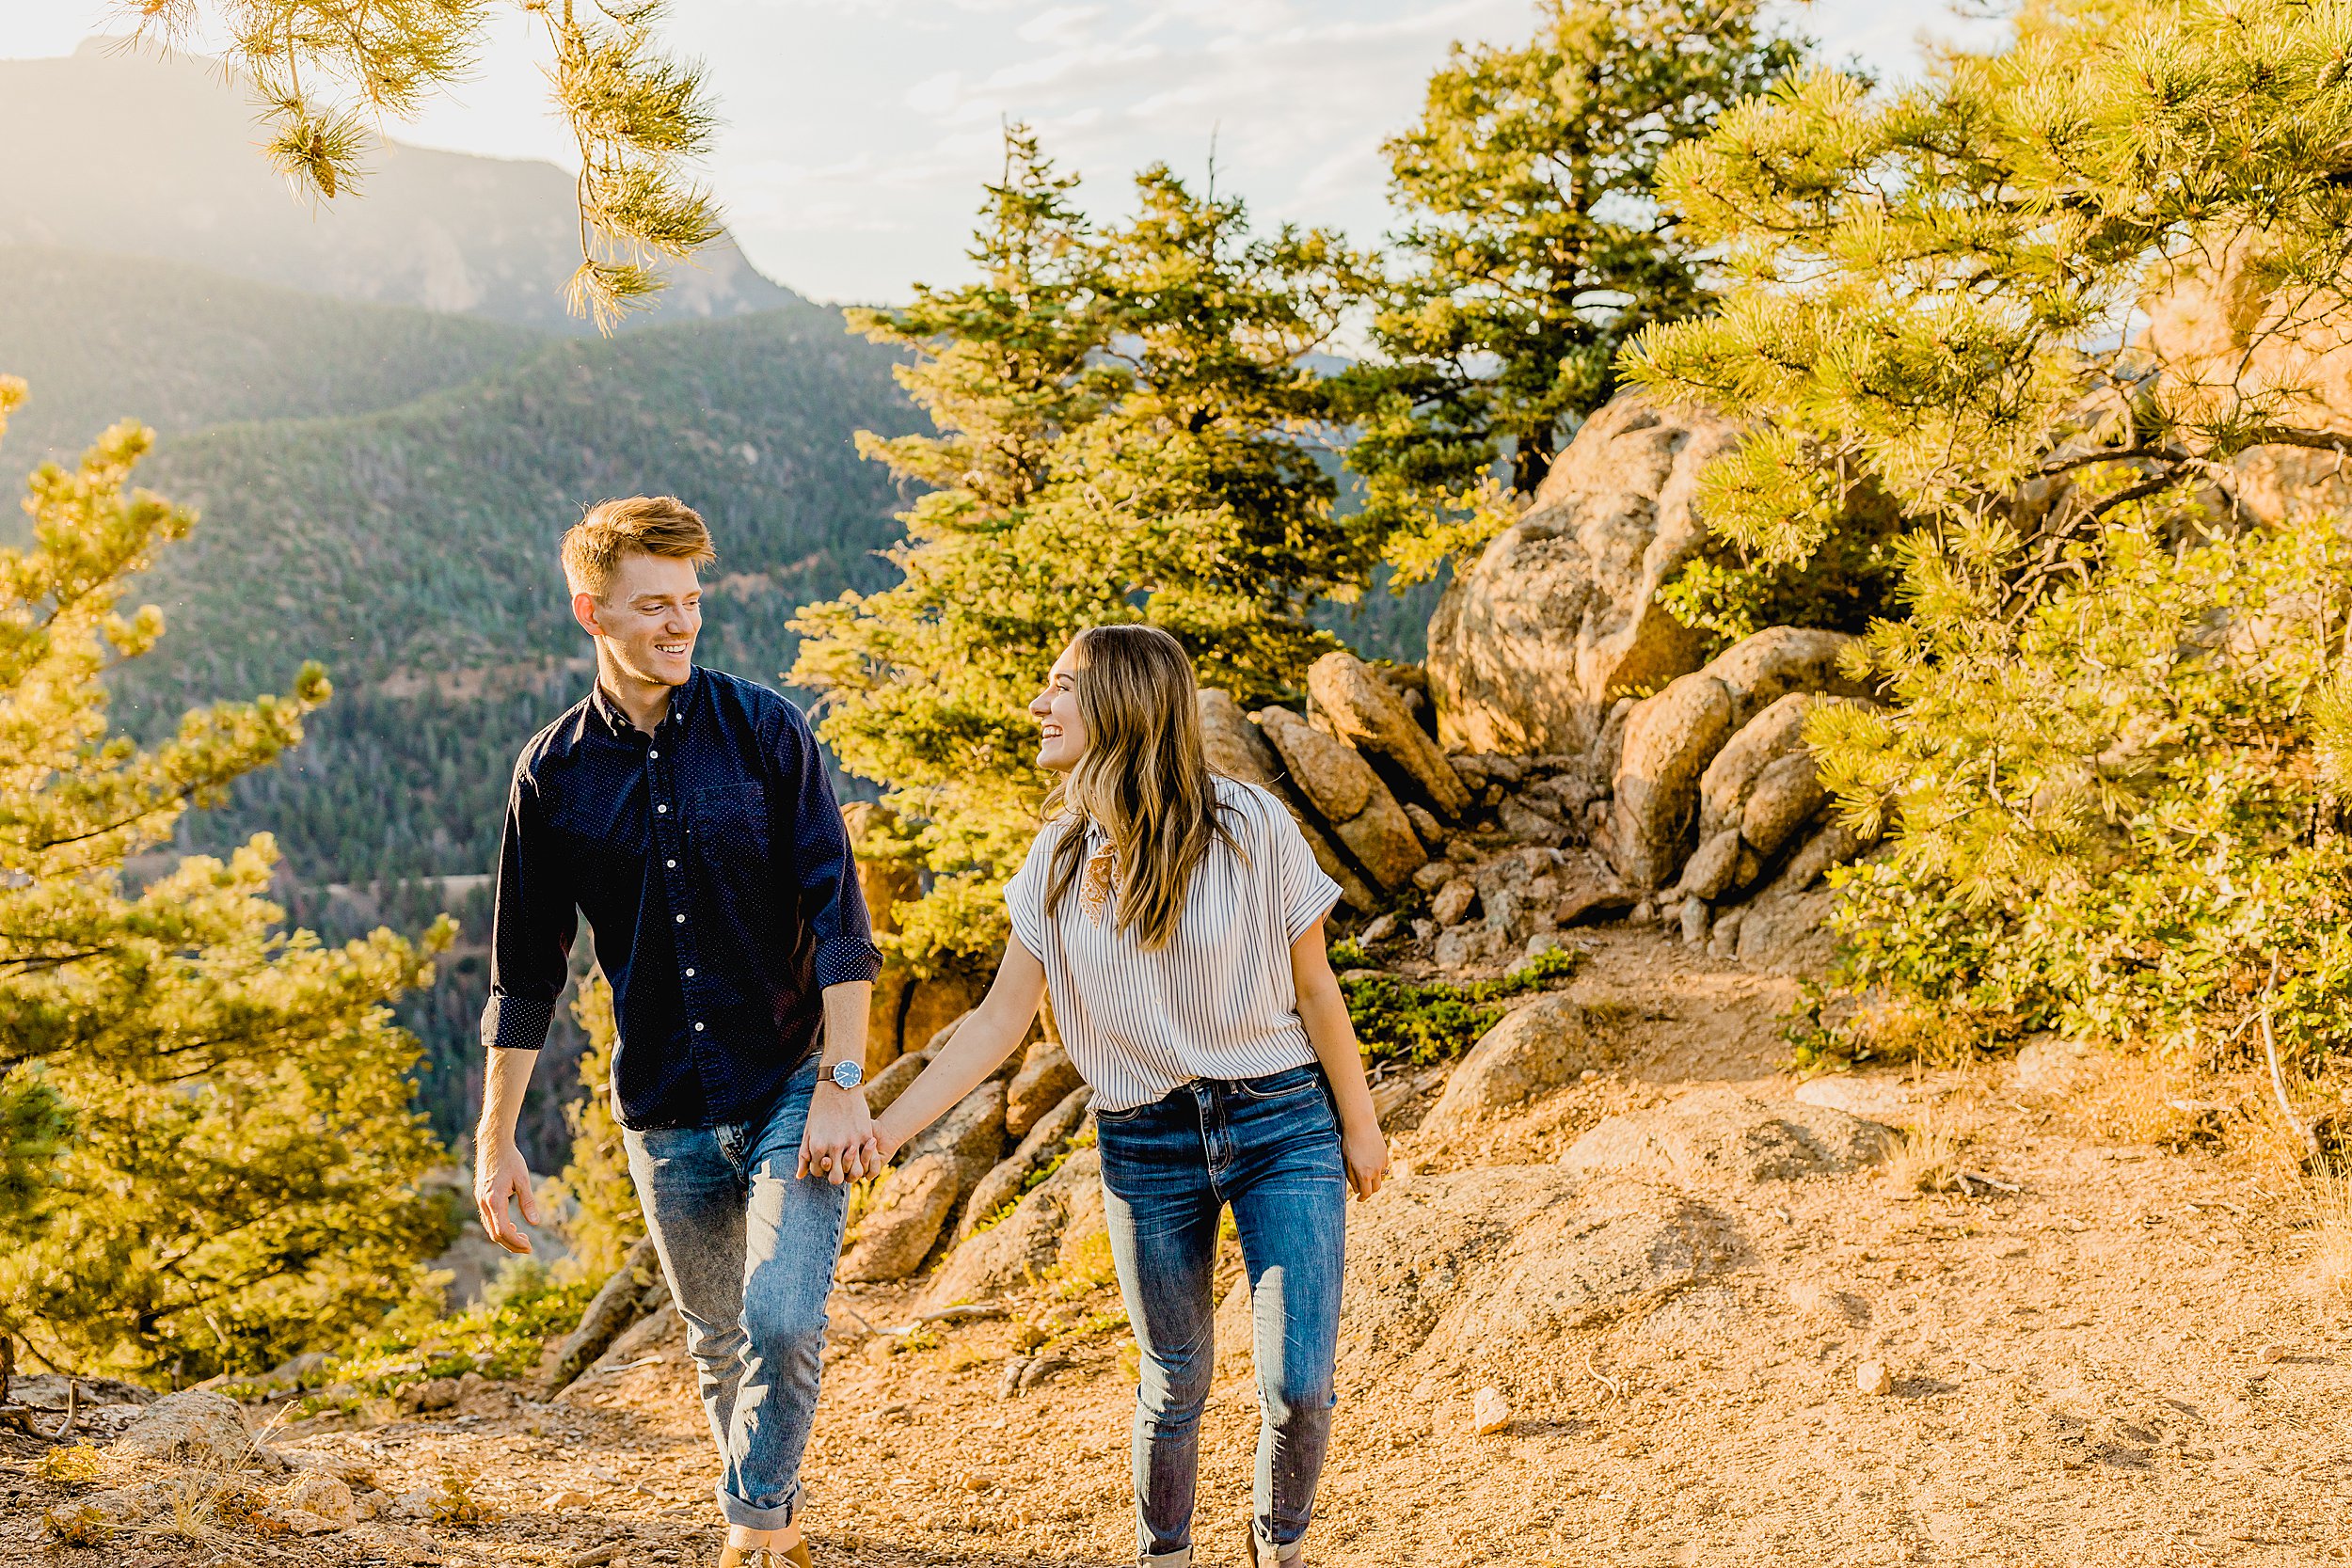 colorado mountain engagement photographer captures couples engagement photos with beautiful mountain scenery at sunset